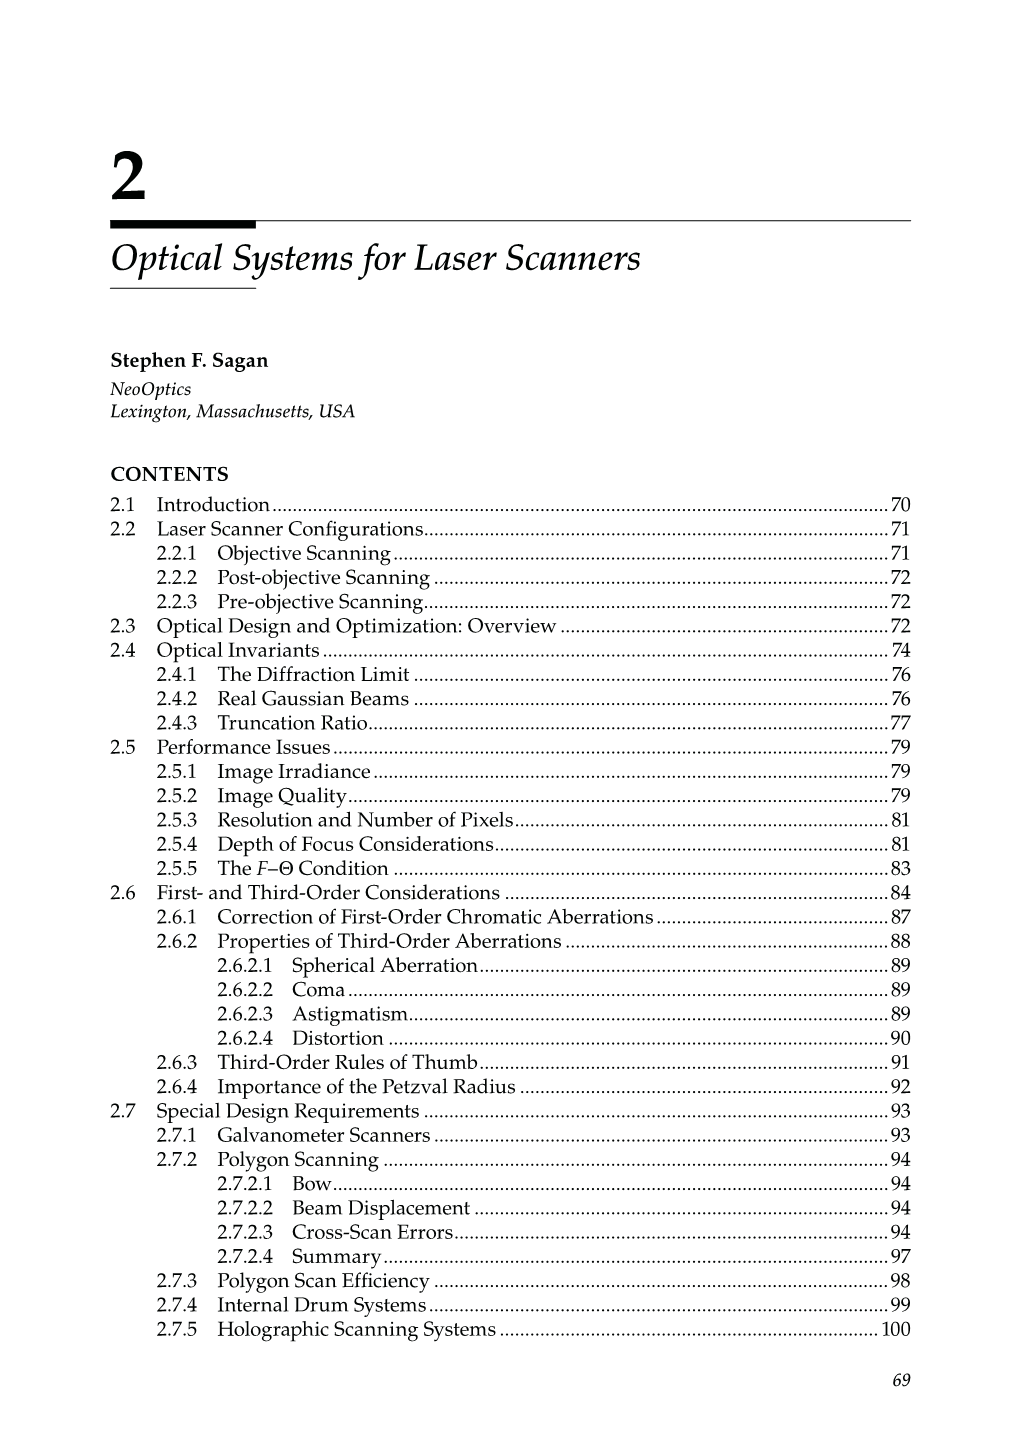 Optical Systems for Laser Scanners1 to Provide Yet Another Perspective